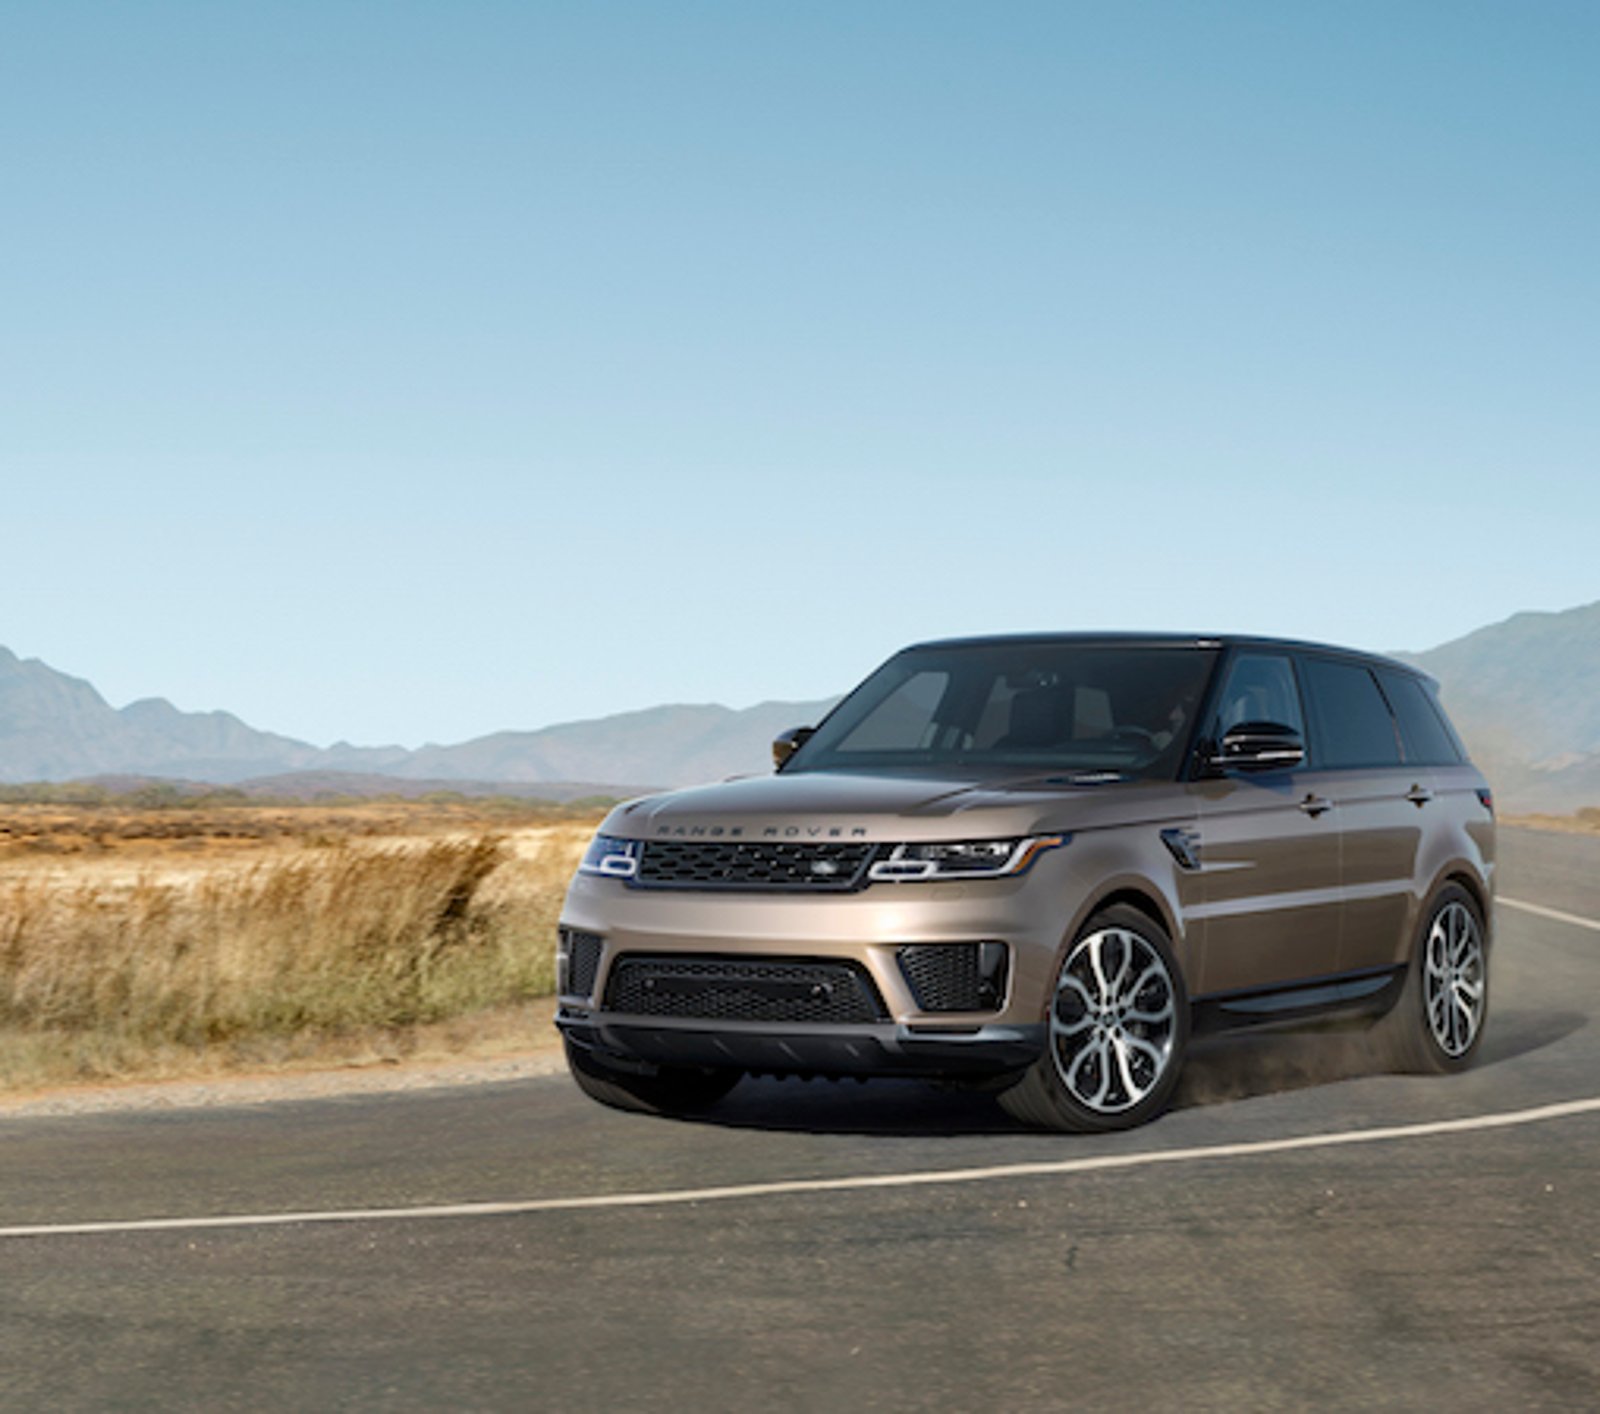 Welcome to <span class="nowrap">Land Rover Fairfield!</span>